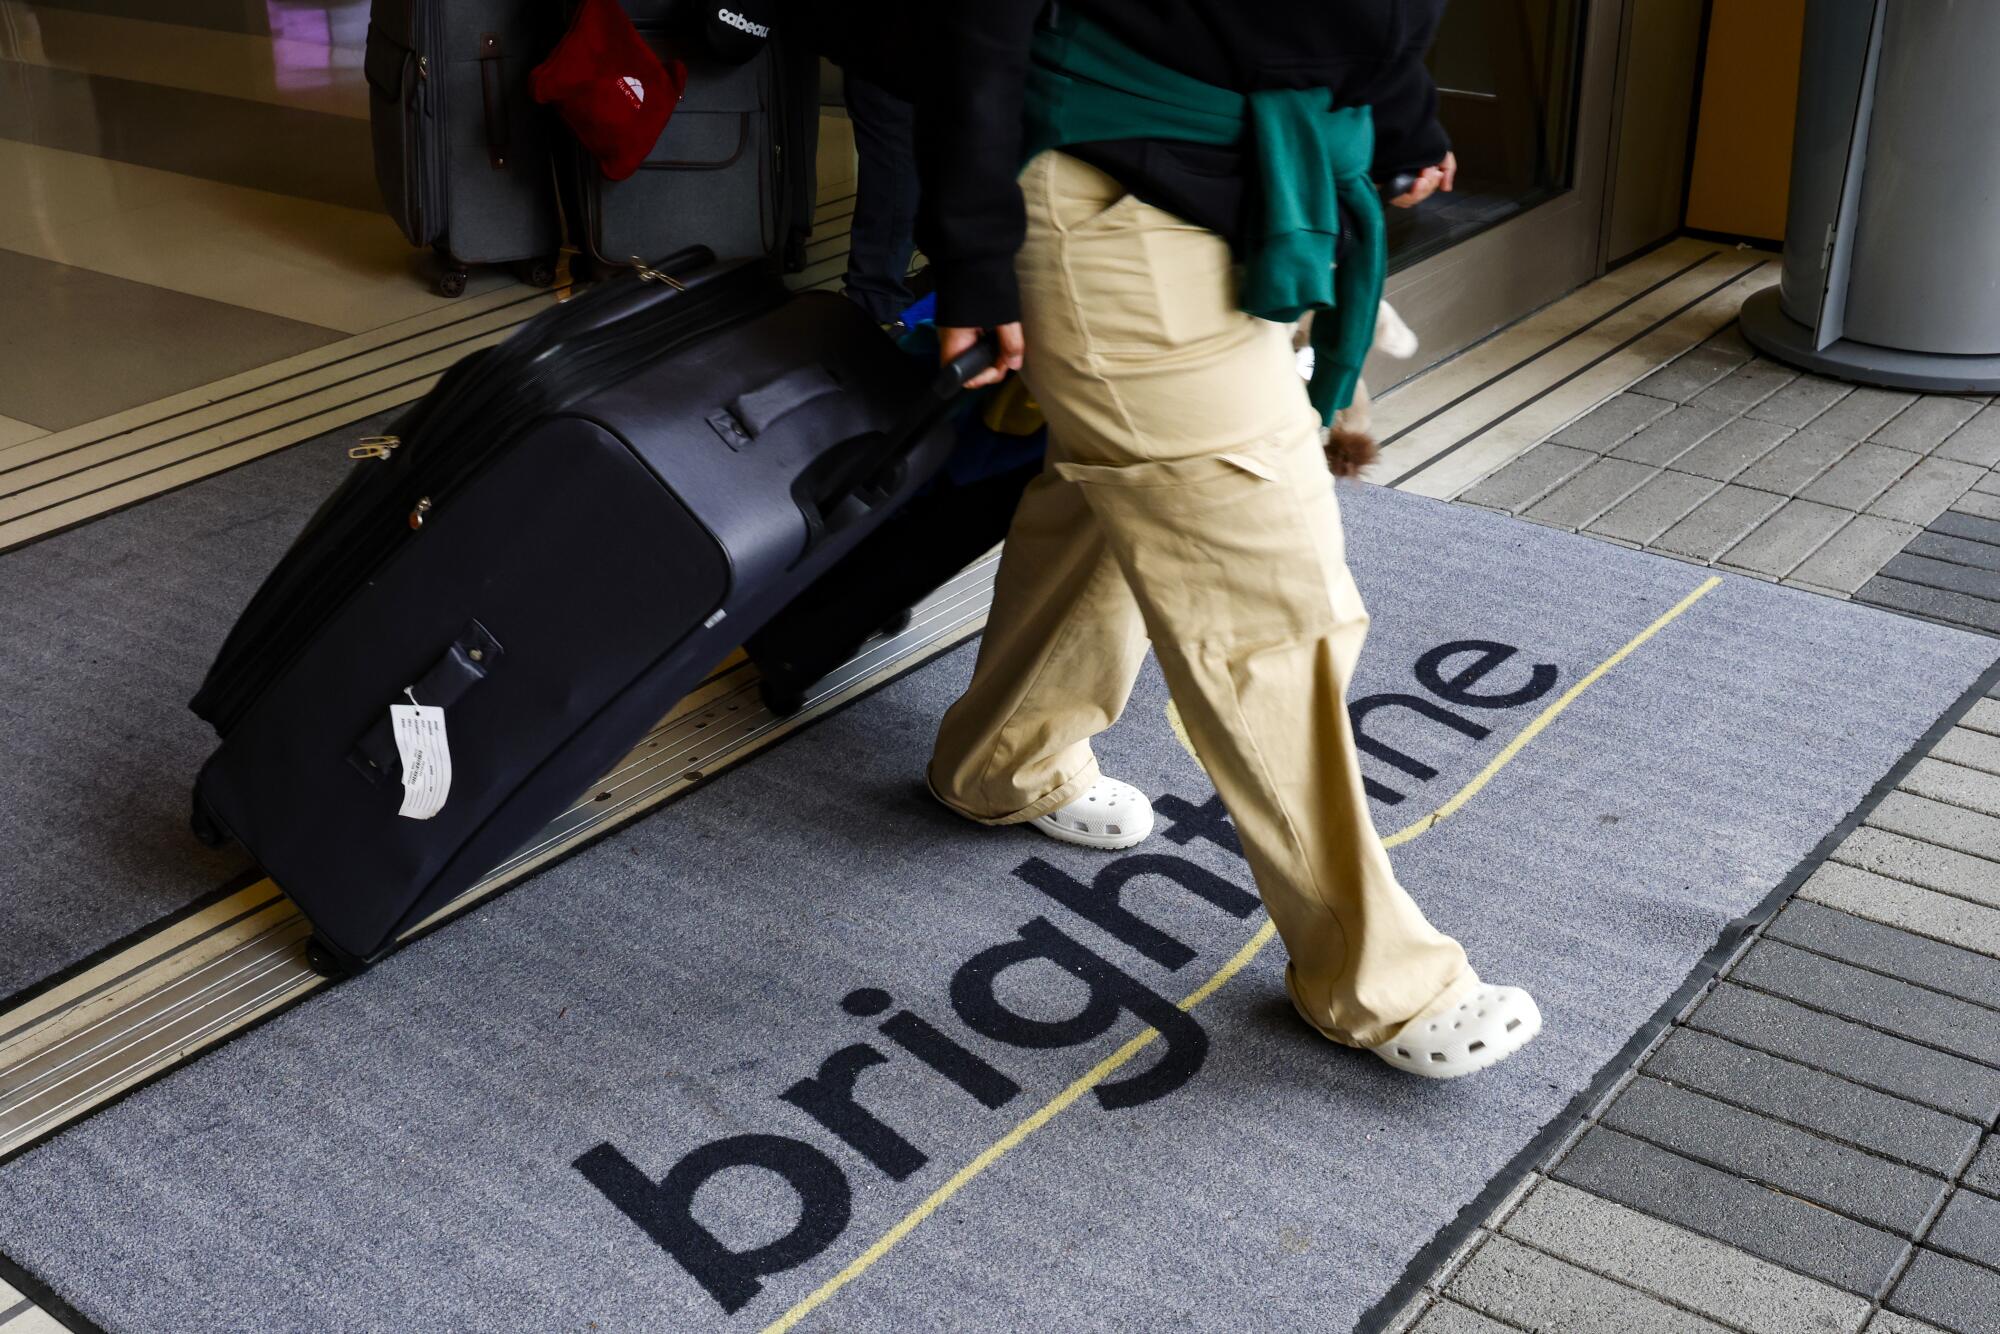 A person carrying luggage walks through a doorway and over a gray mat that says "brightline" in dark letters